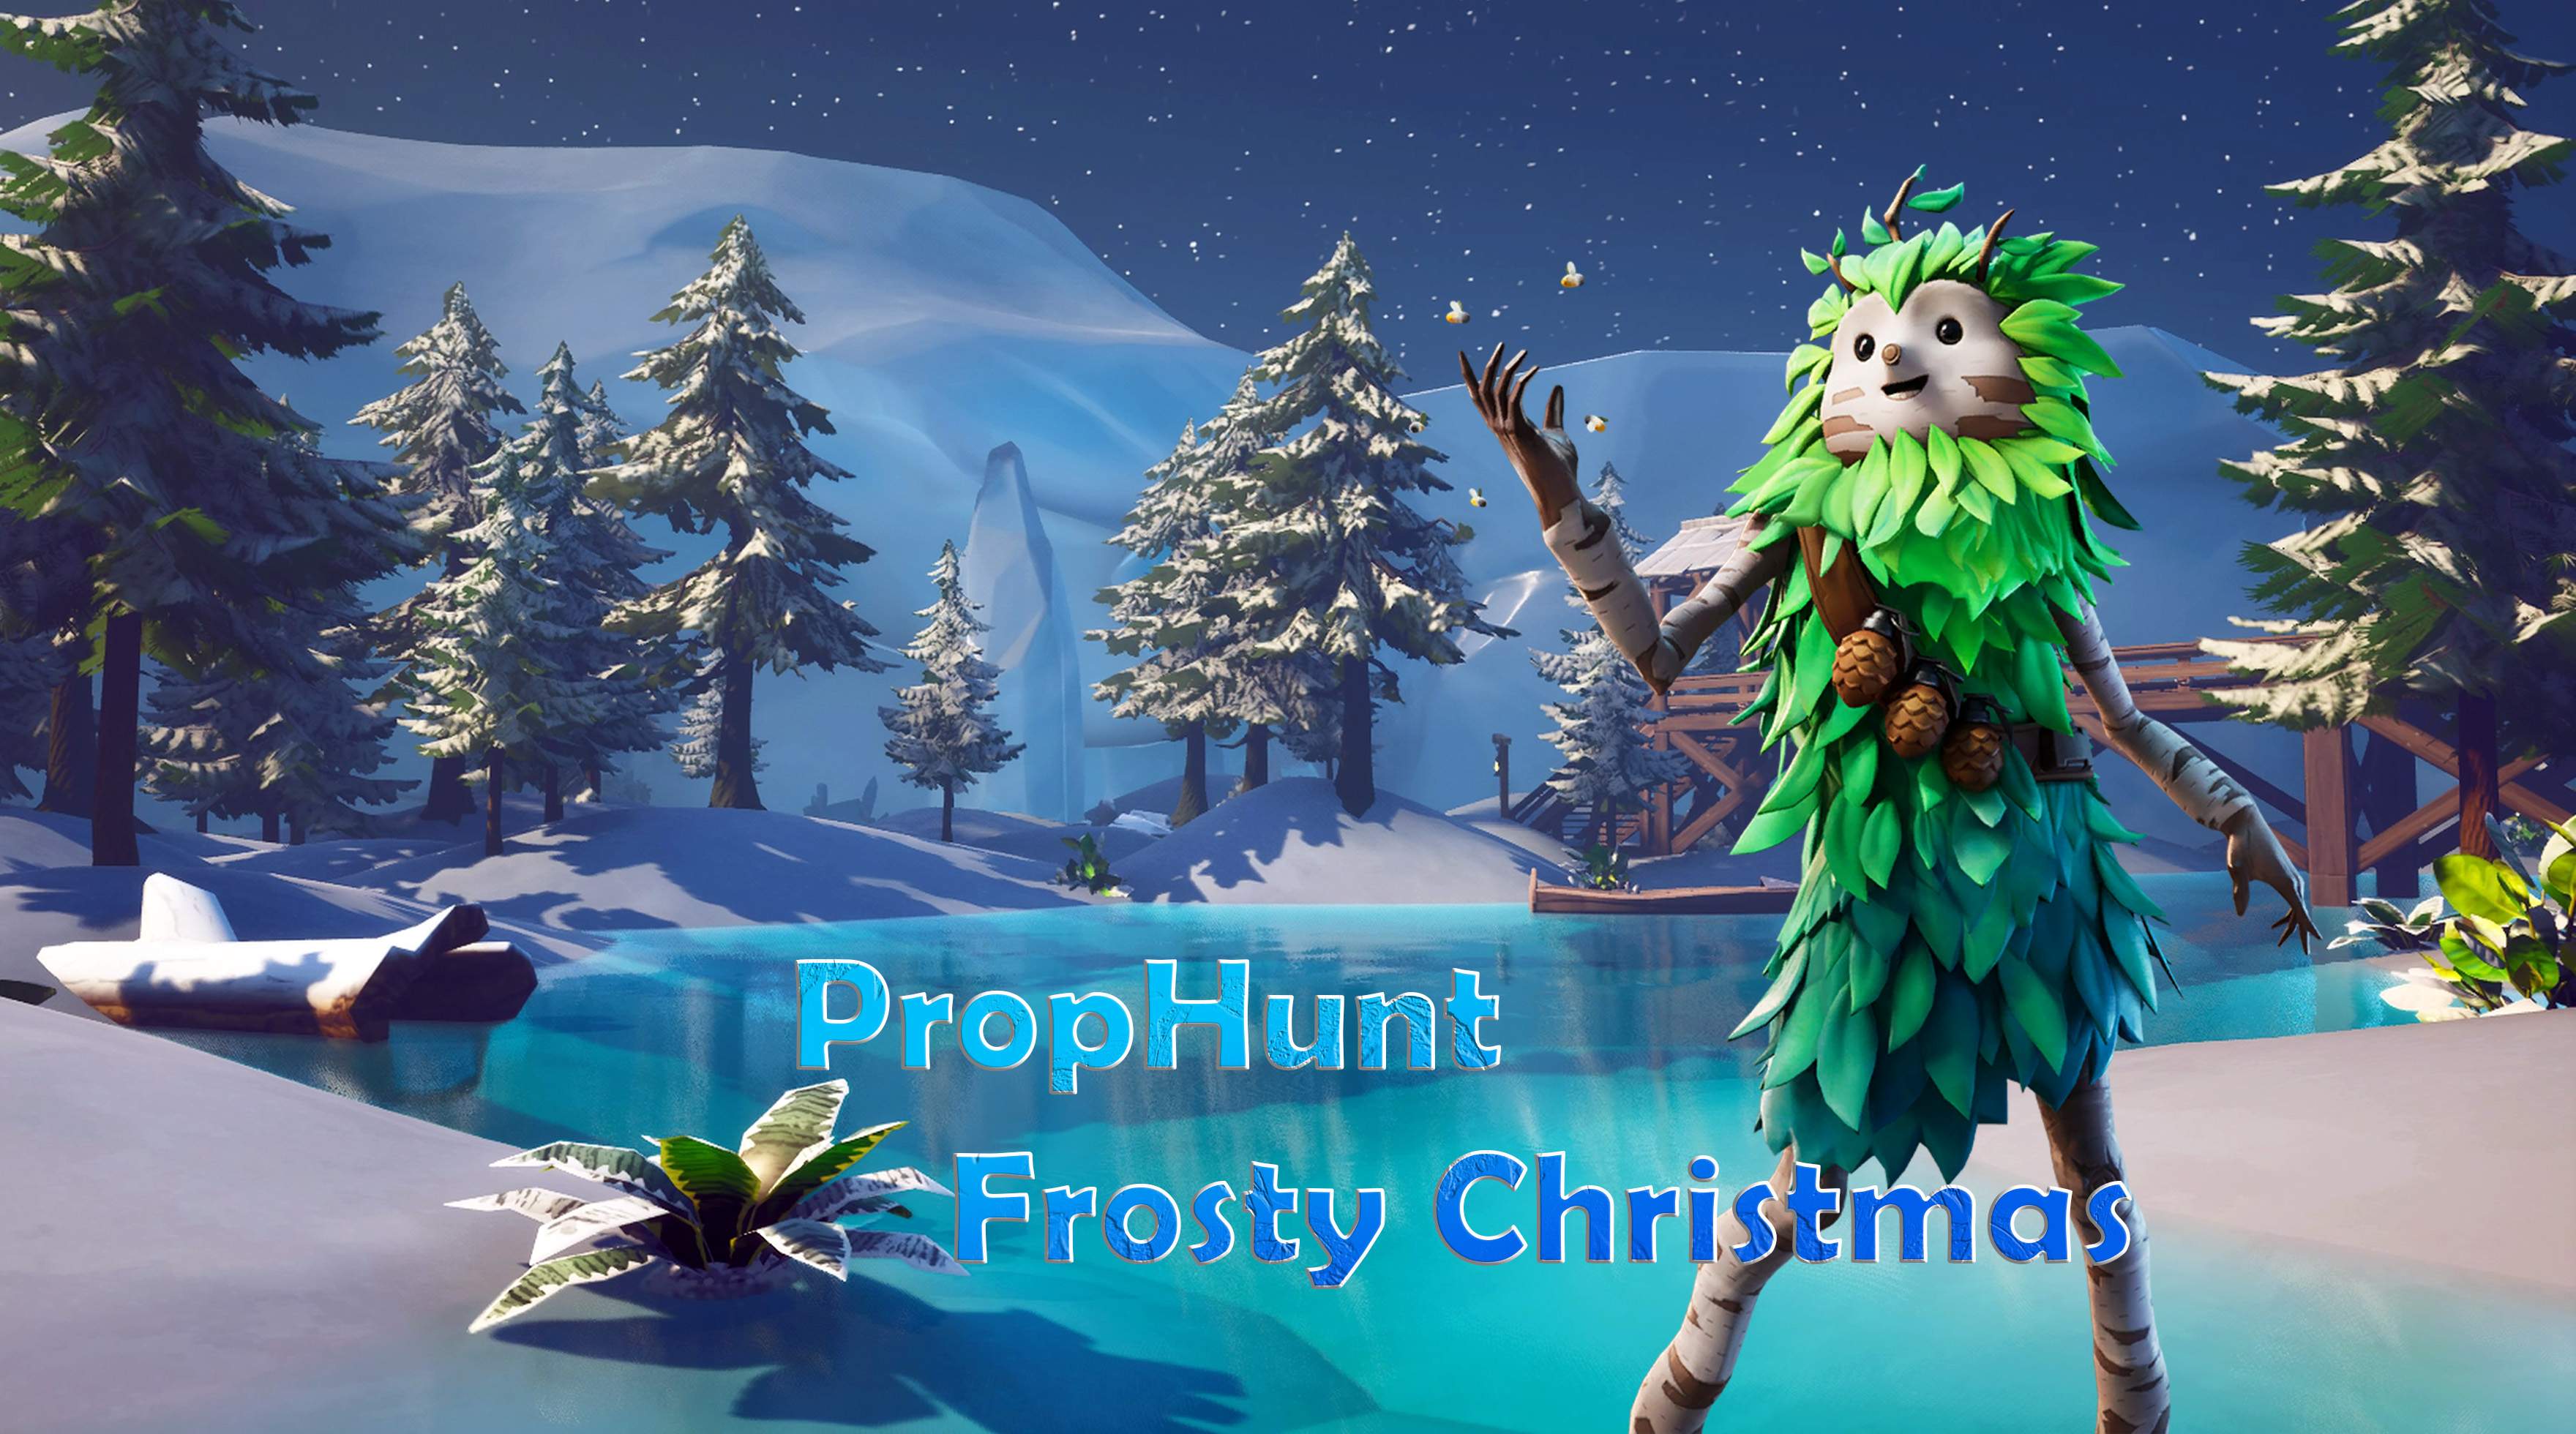 PROPHUNT - FROSTY CHRISTMAS 9100-3928-7648